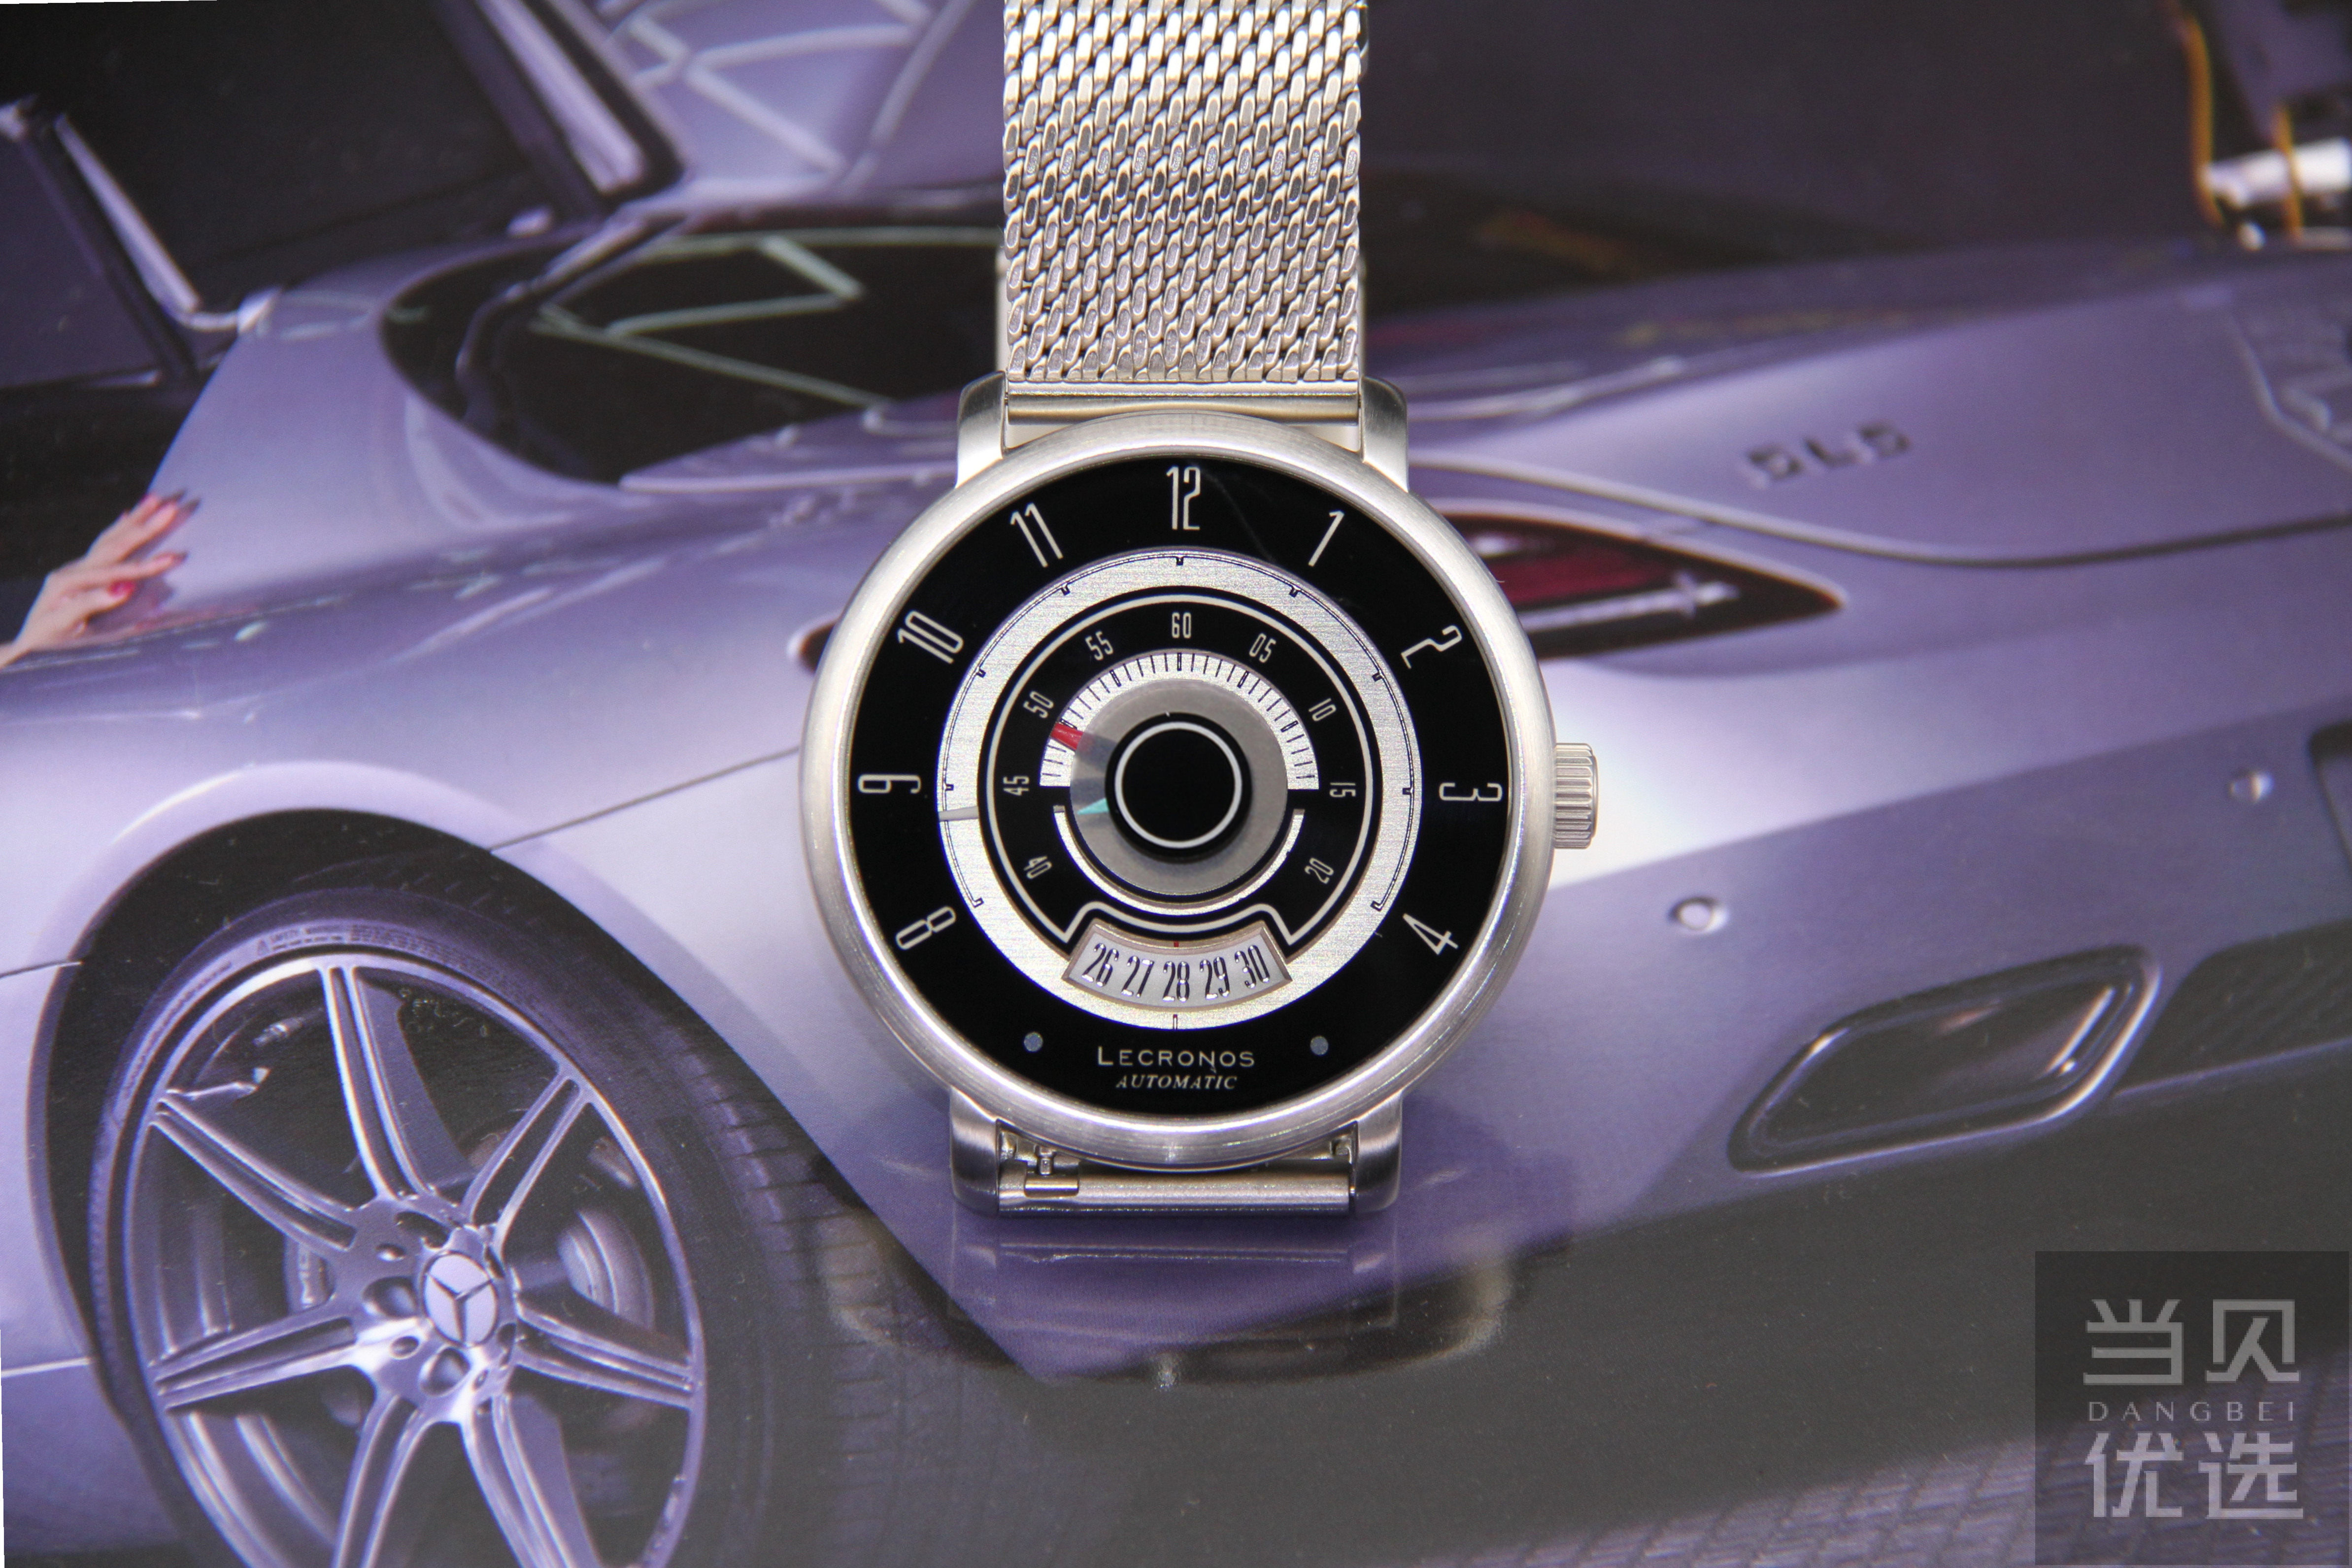 Girard-Perregaux is the new official watch partner for Aston Martin ...